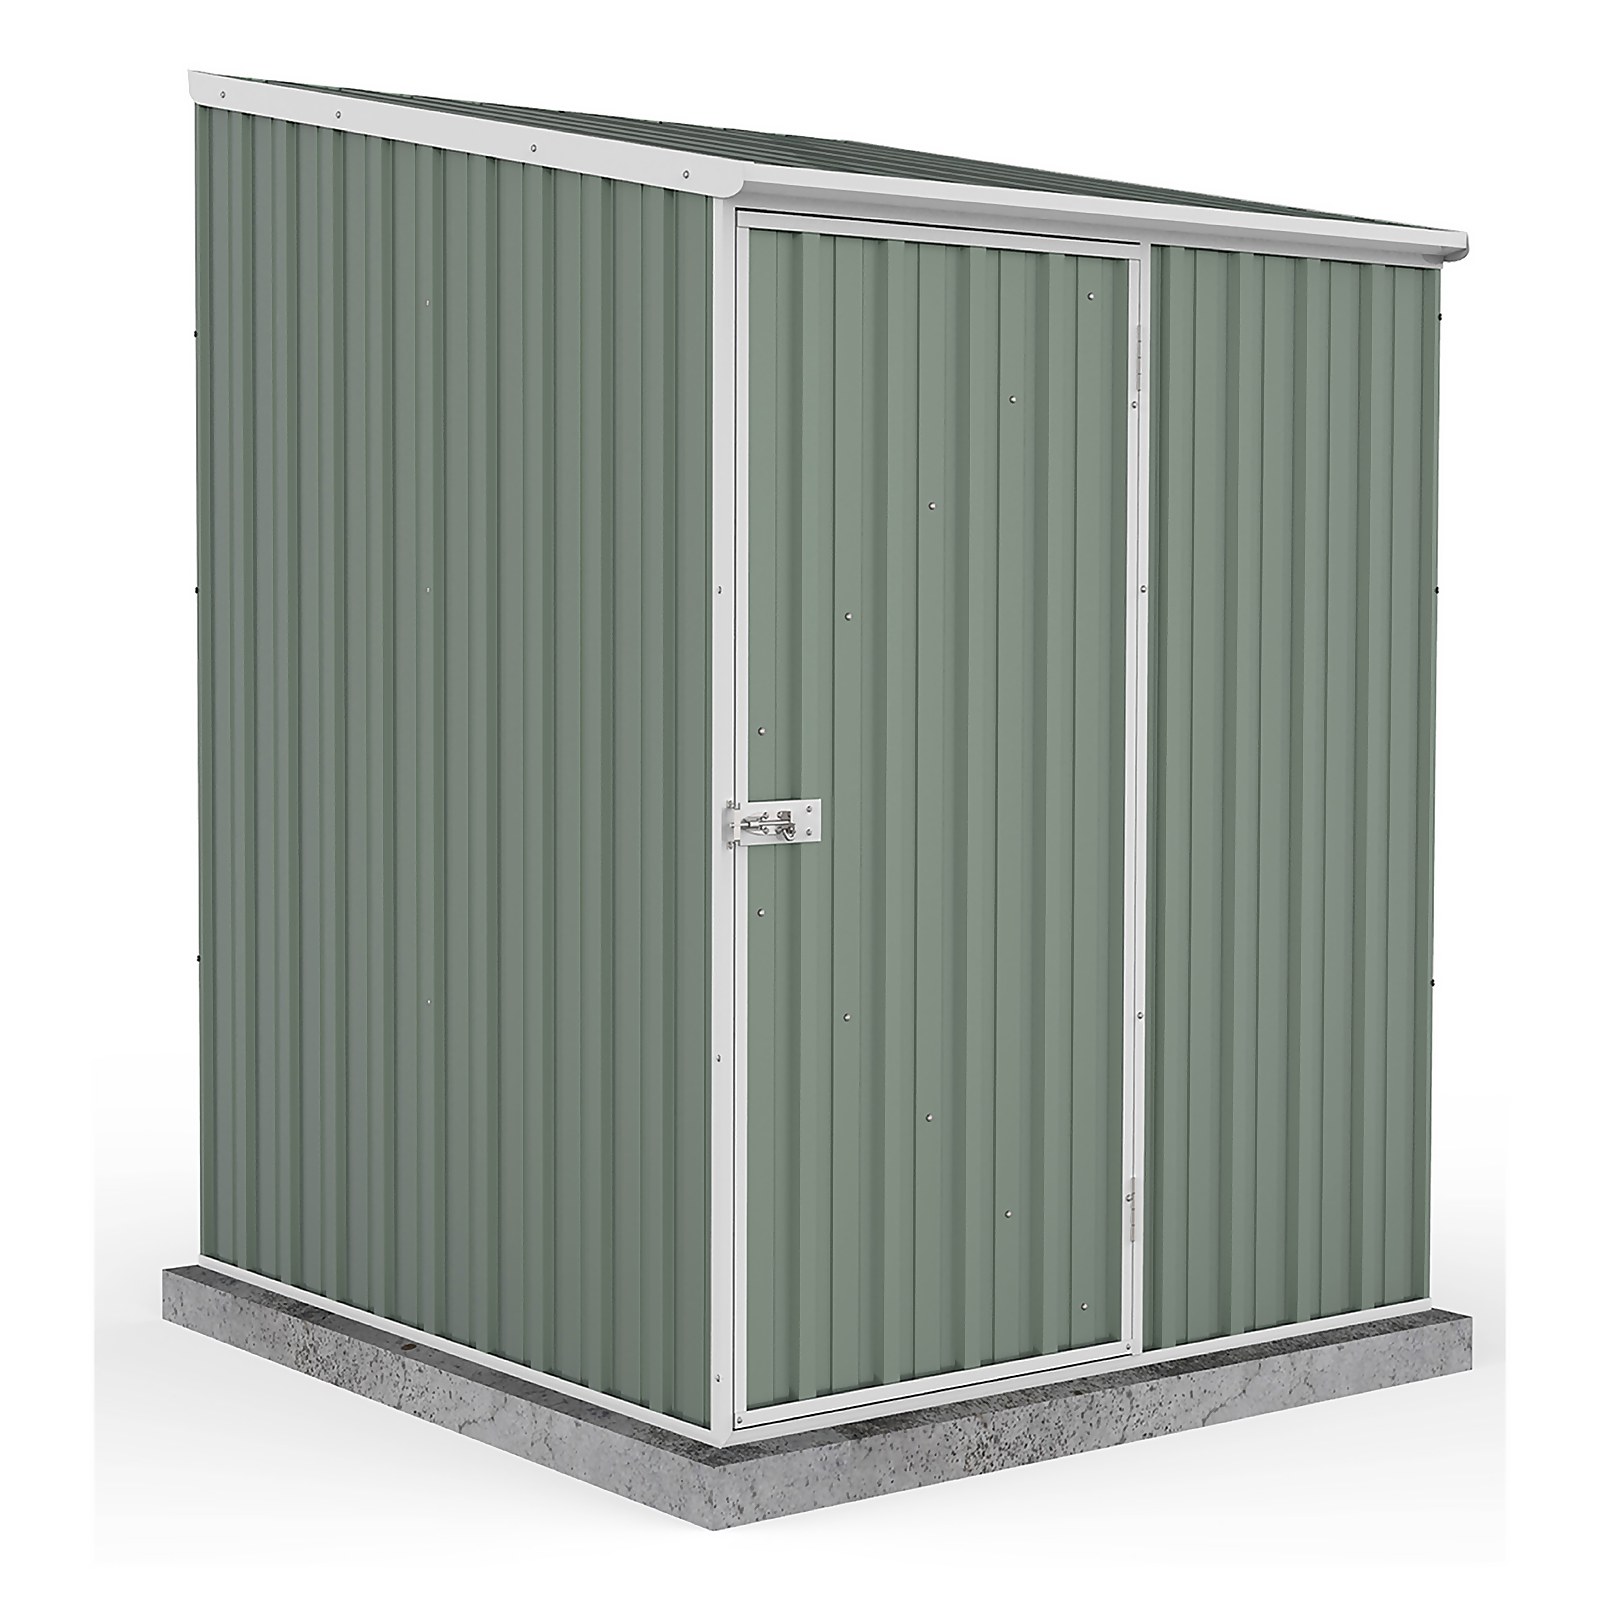 Absco 5 x 5ft Space Saver Metal Pent Shed - Green